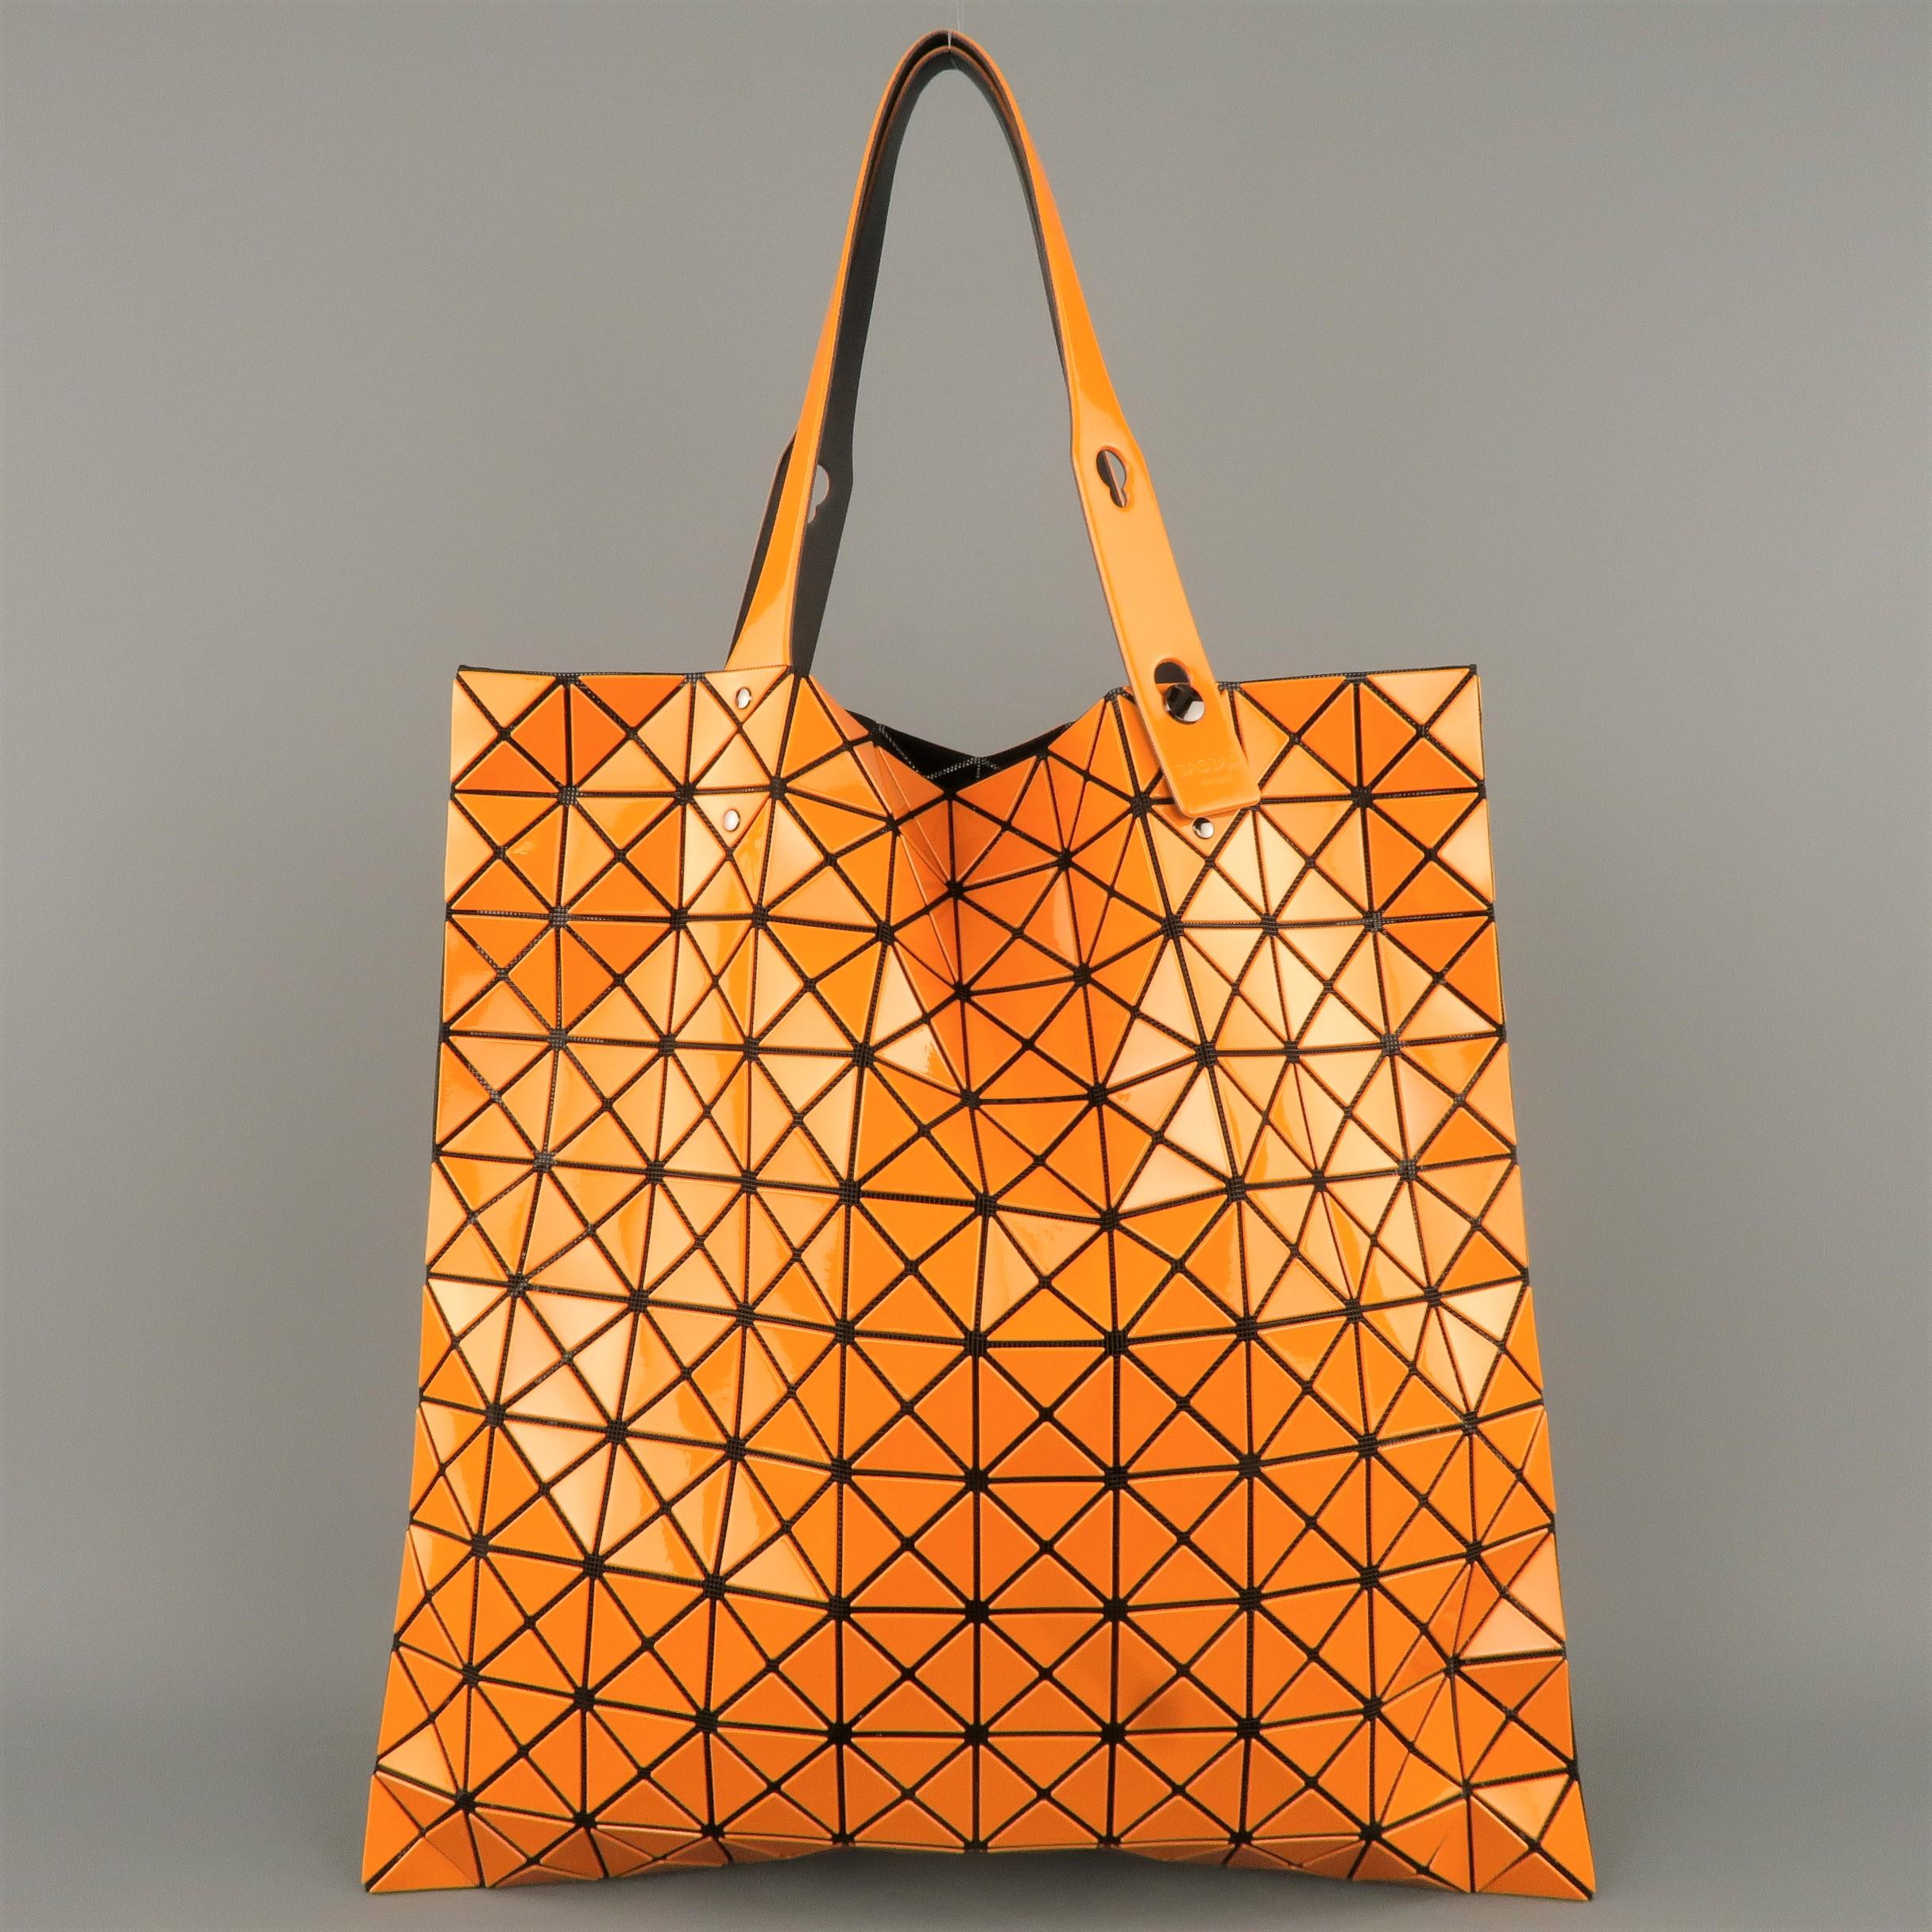 BAO BAO by ISSEY MIYAKE Lucent tote bag comes in black mesh with geometric orange PVC overlay, adjustable straps, and internal pocket. Never worn.
 
New without Tags.
 
Size: 15.5 x 15.5 in.
Drop: 8 in.